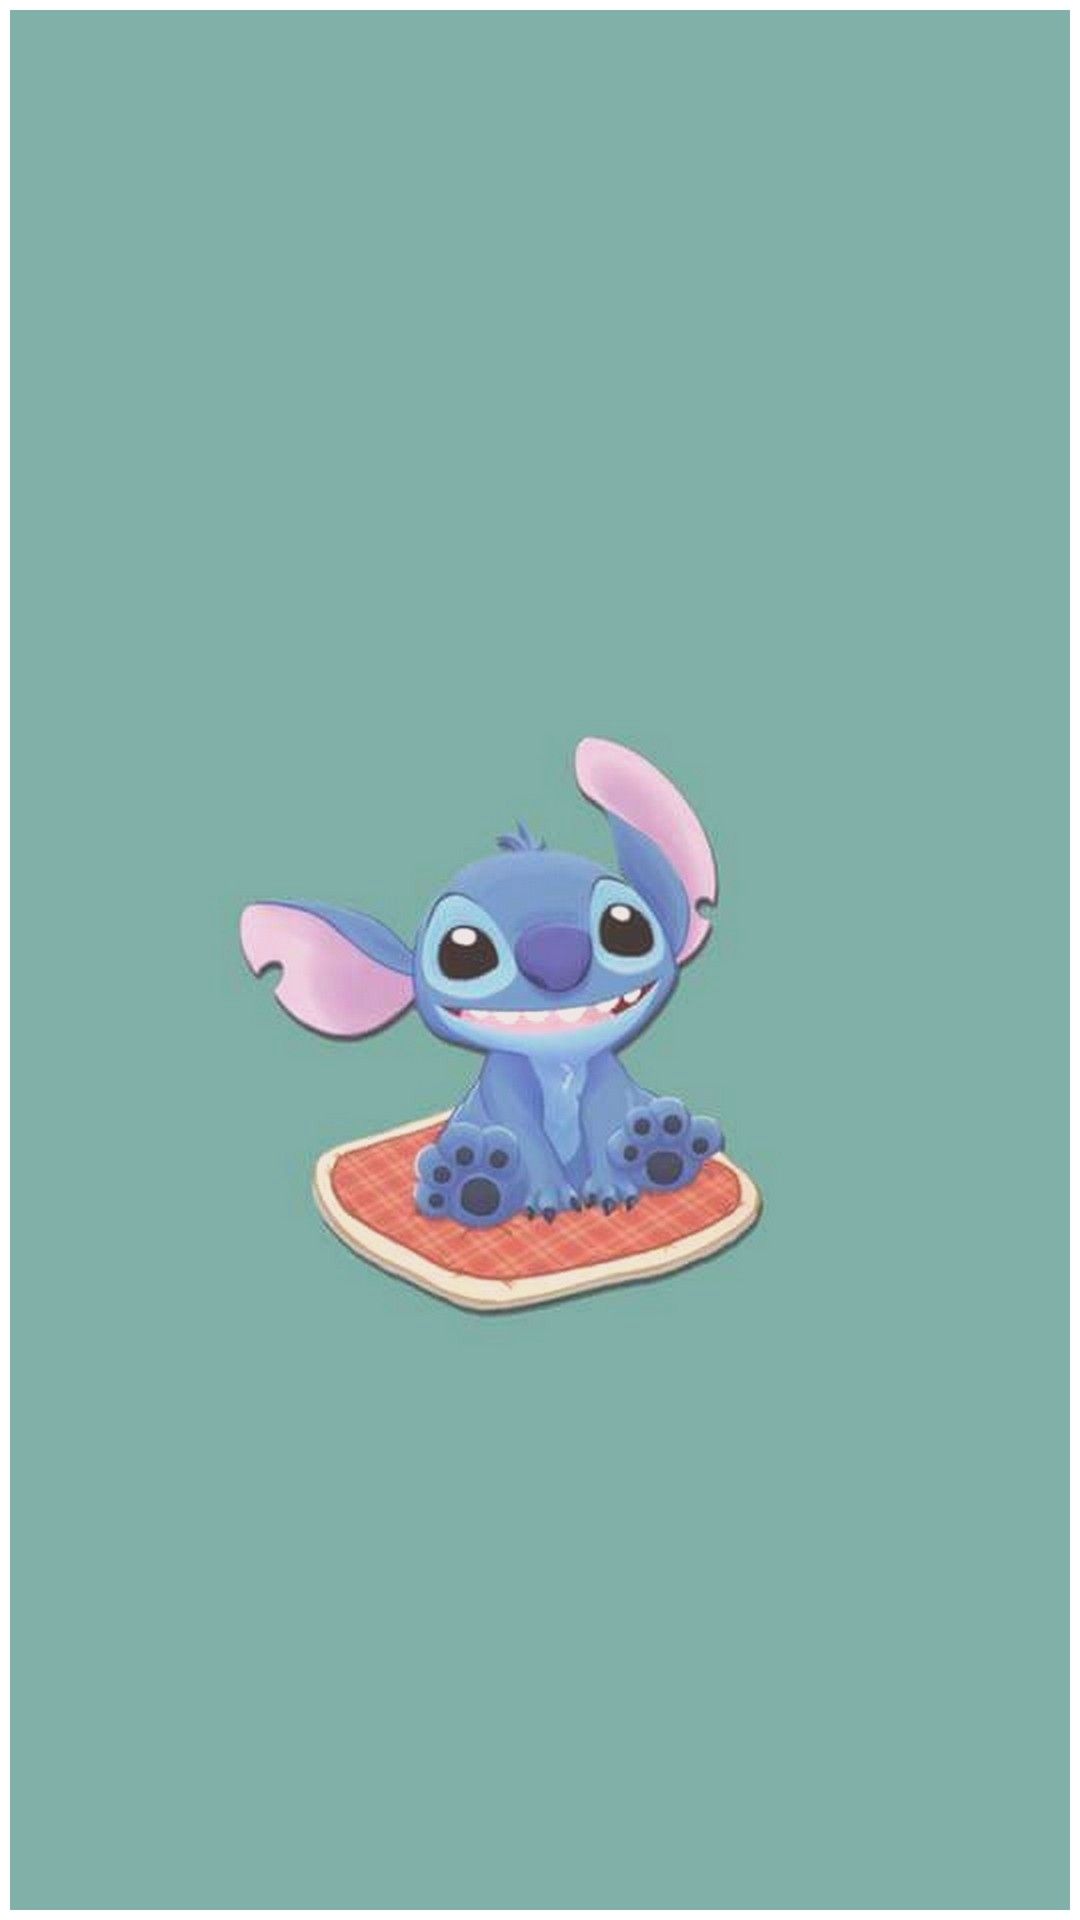 Cute Lilo and Stitch Wallpaper 60 images